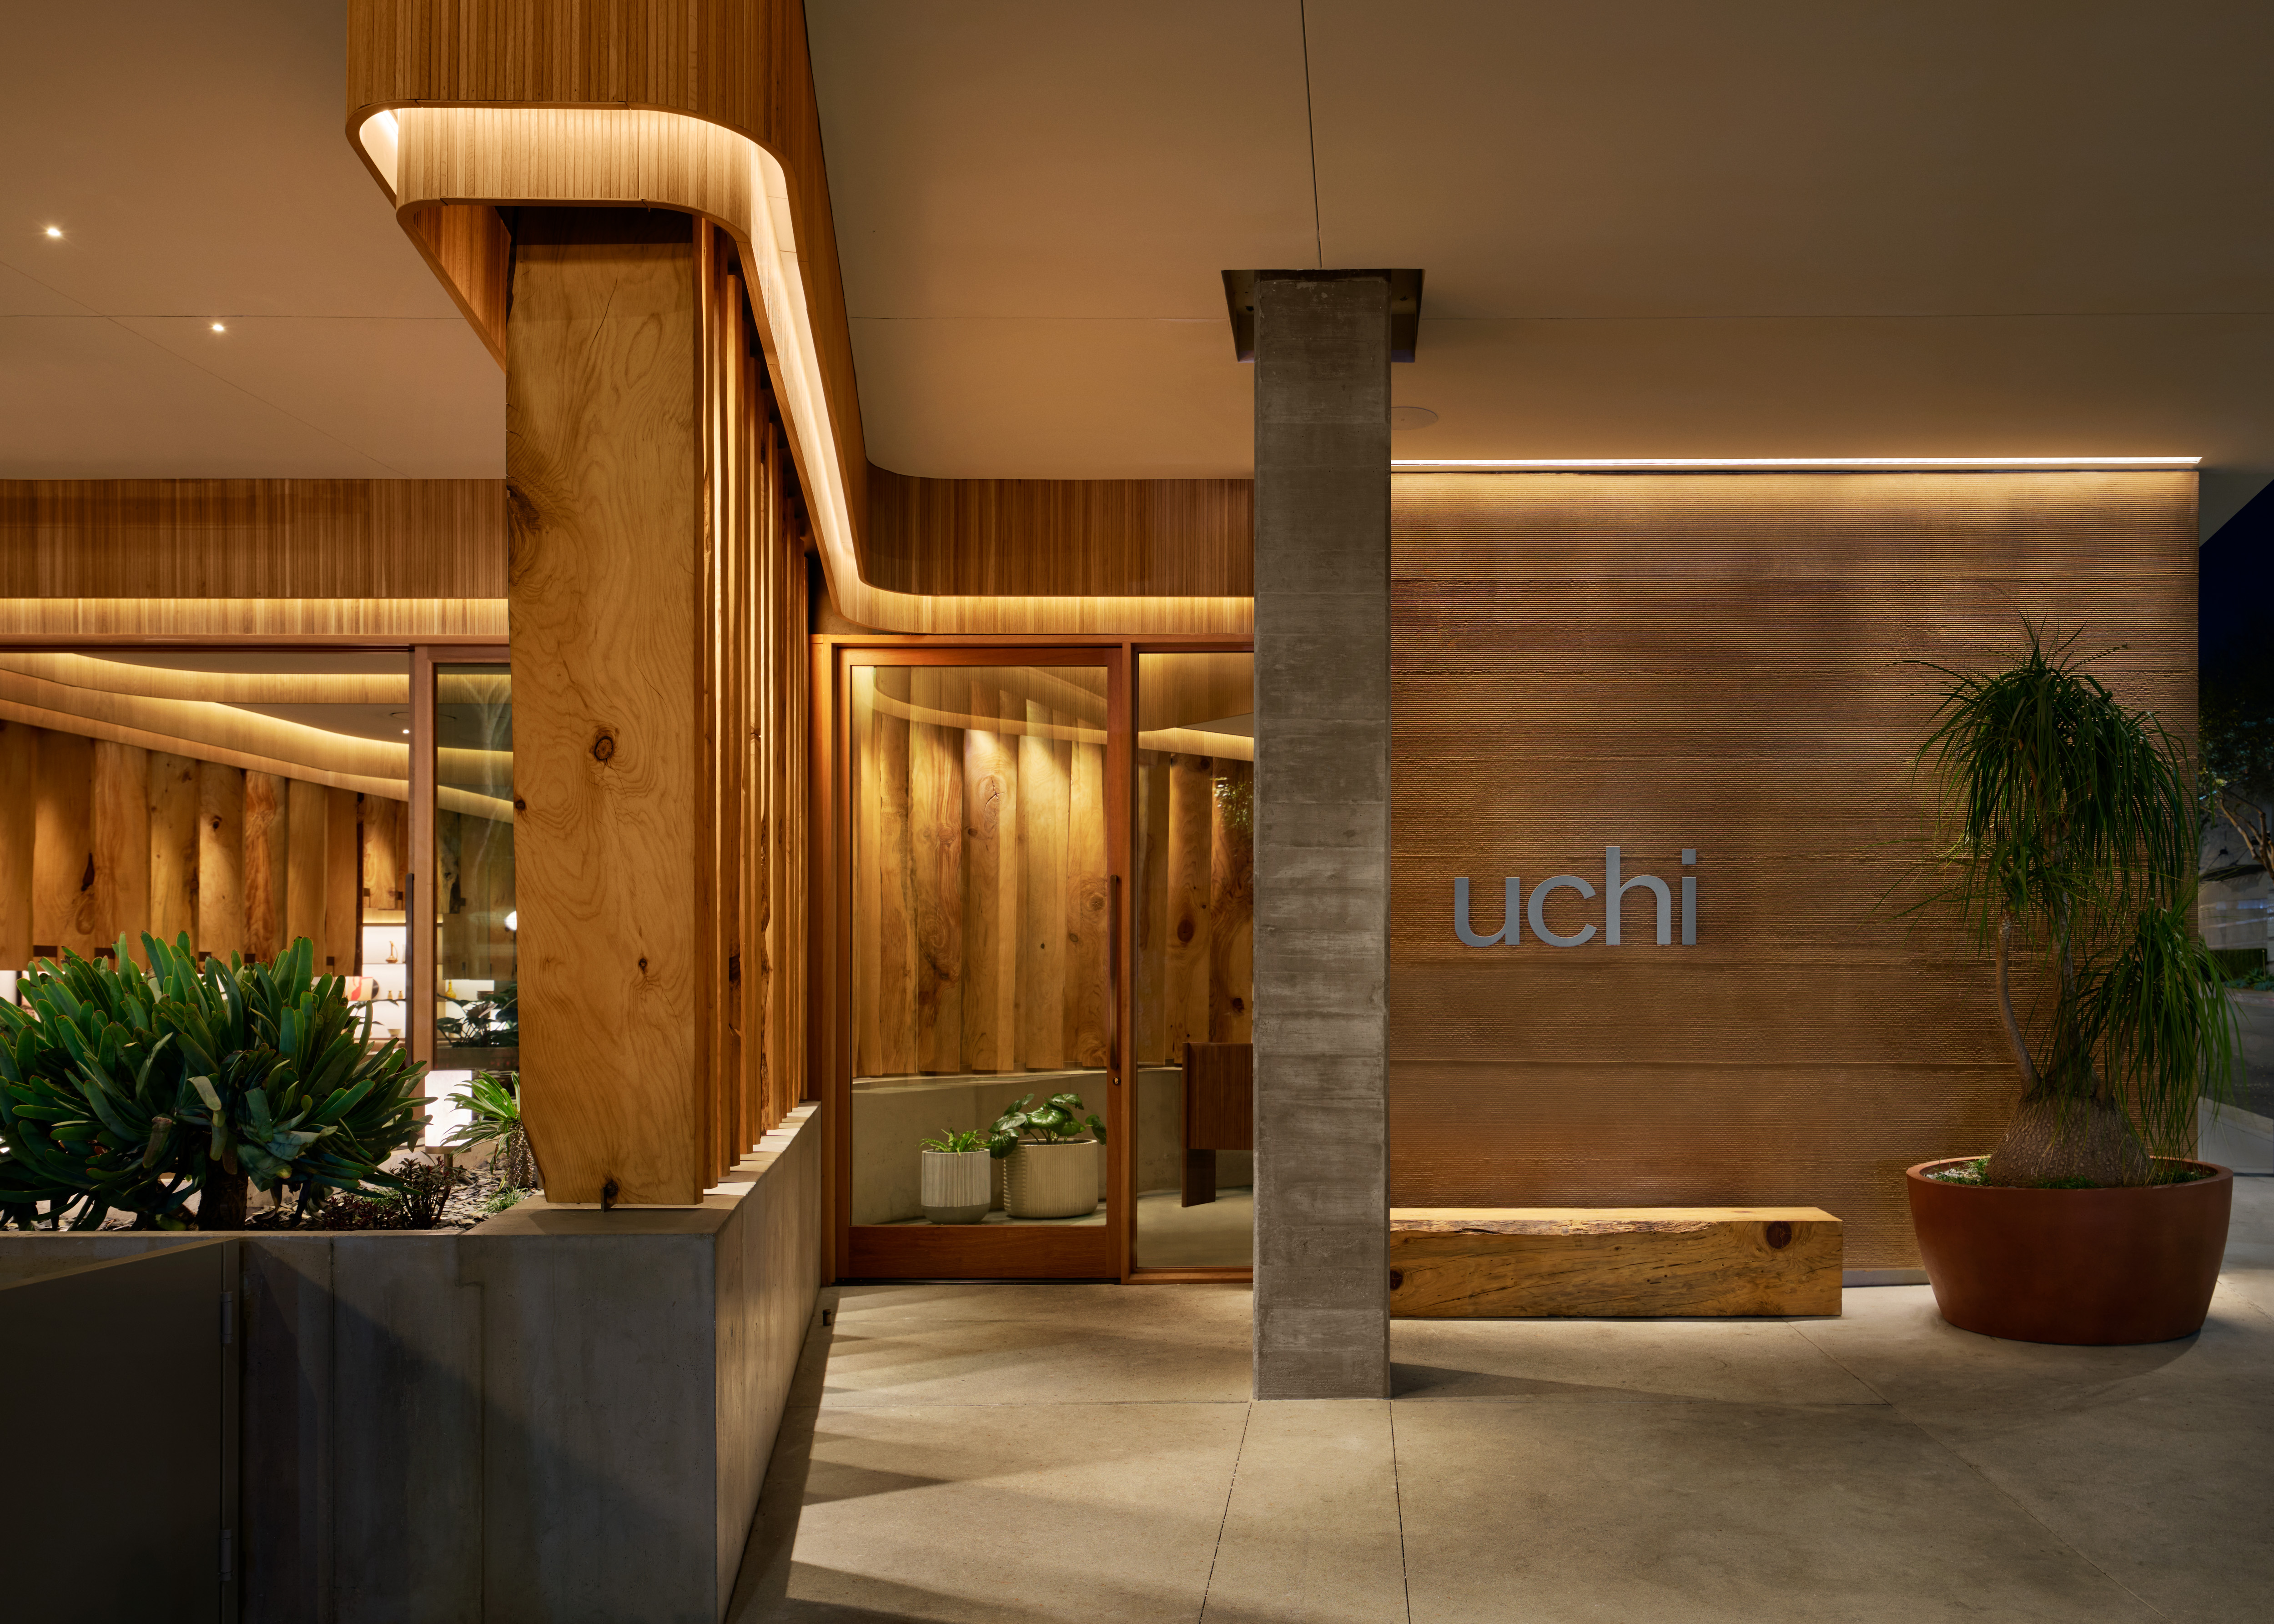 Los Angeles Cast Stone had the pleasure of contributing to the design of Uchi Japanese Restaurant, a bustling bar tucked away in West Hollywood, CA.